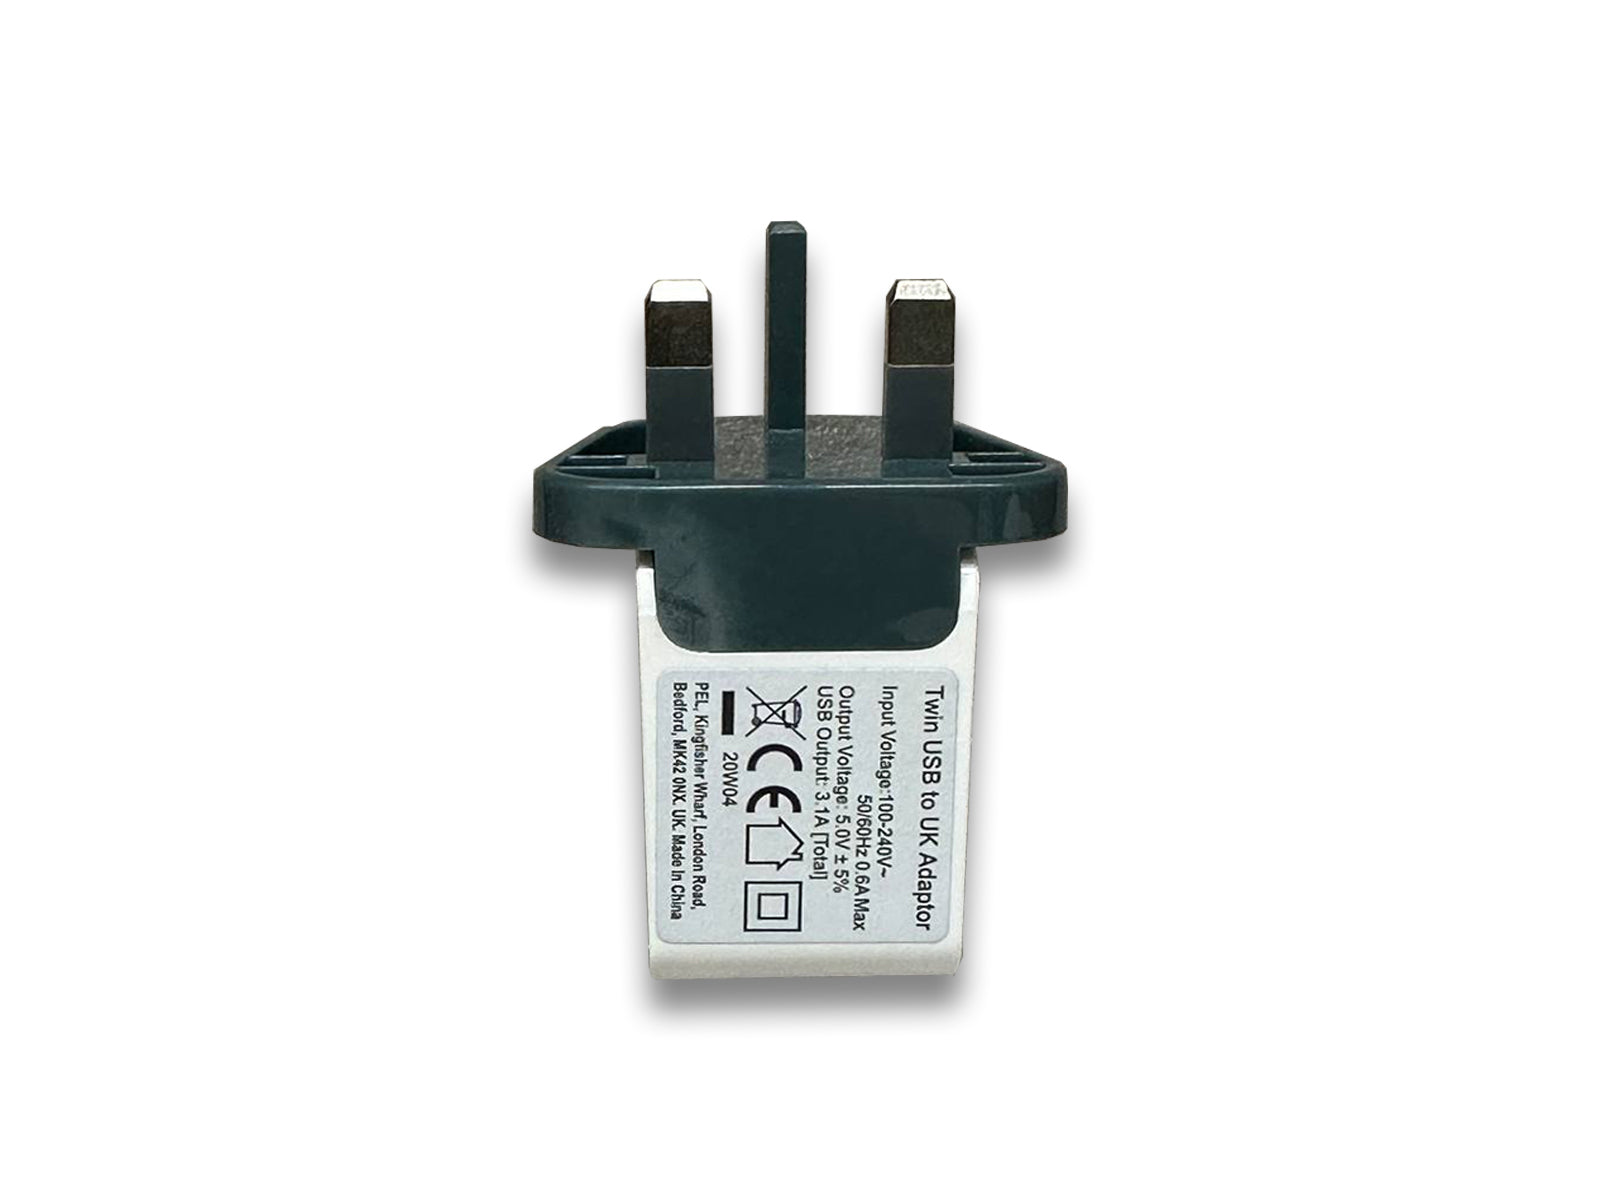 Image shows bottom view of wall charger on white background